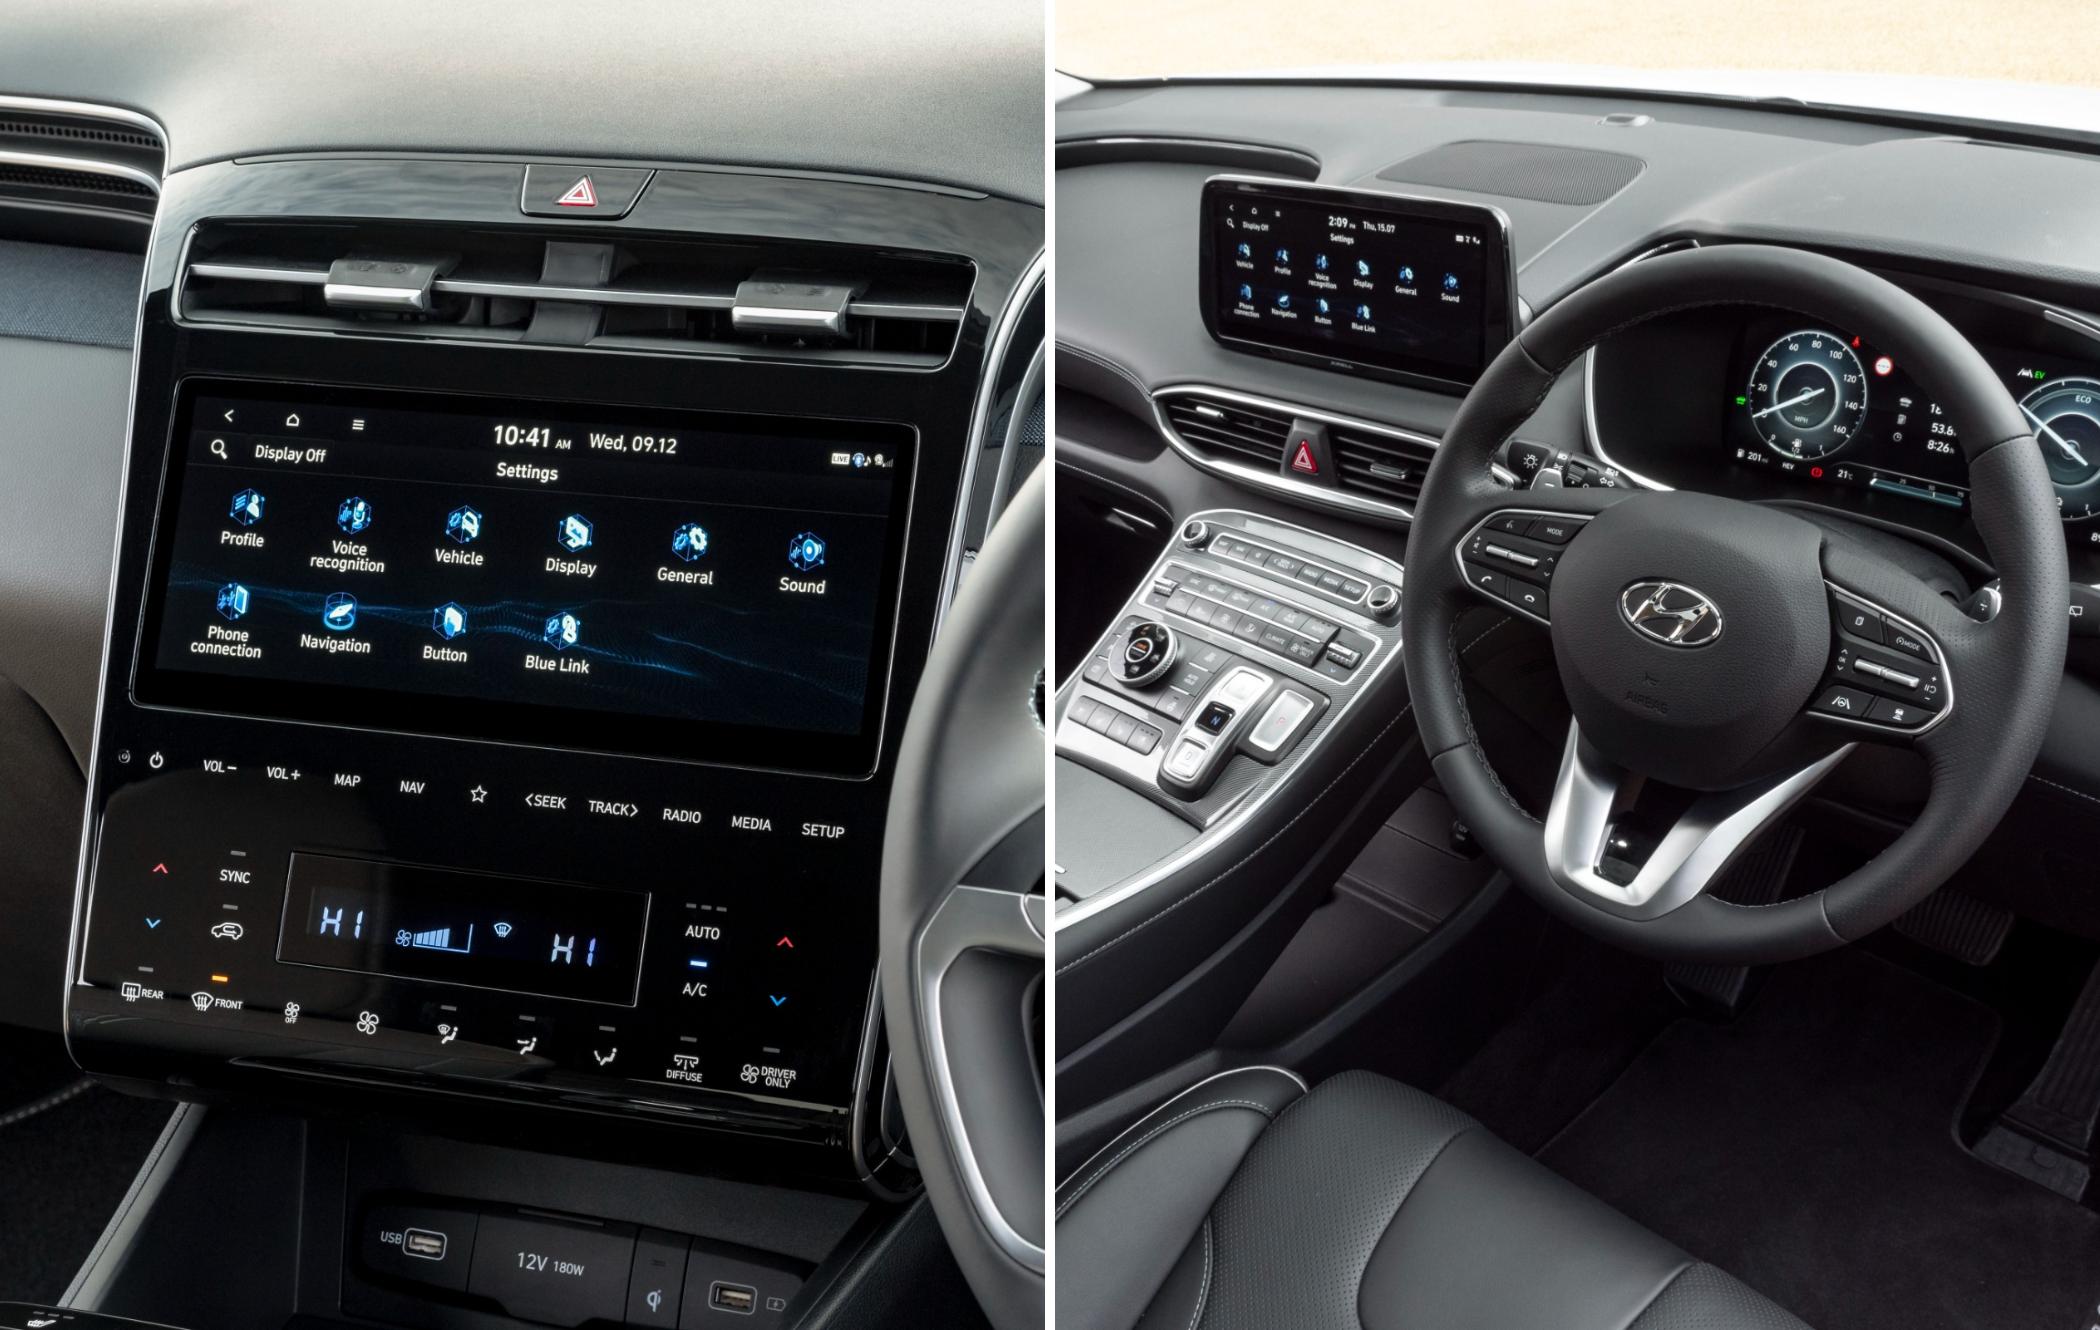 on the left is a hyundai tucson's infotainment touchscreen and on the right is a hyundai santa fe's steering wheel